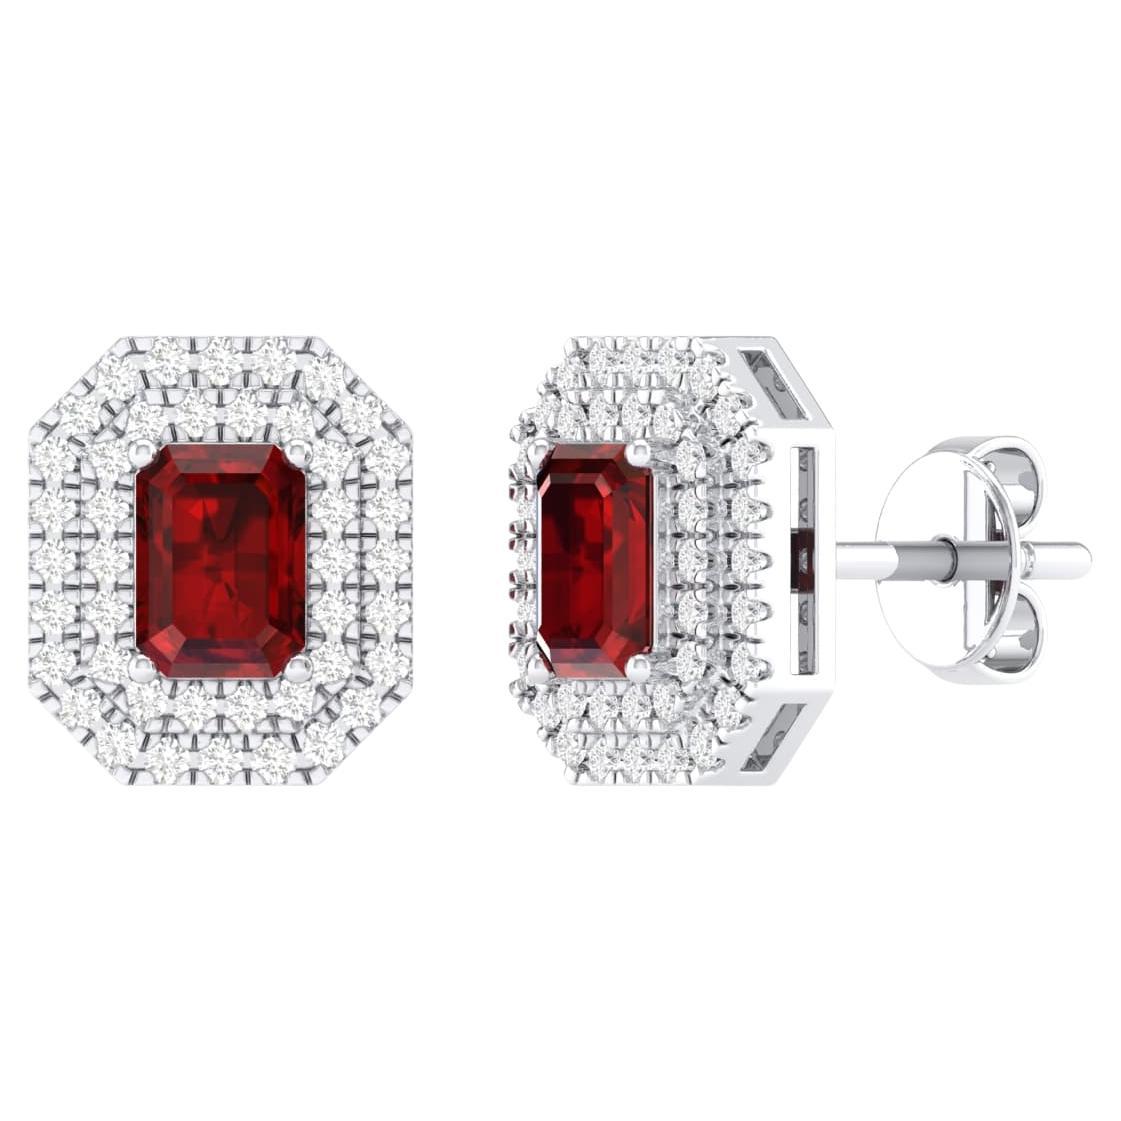 18 Karat White Gold 1.26 Carat Ruby Solitaire Stud Earrings For Sale